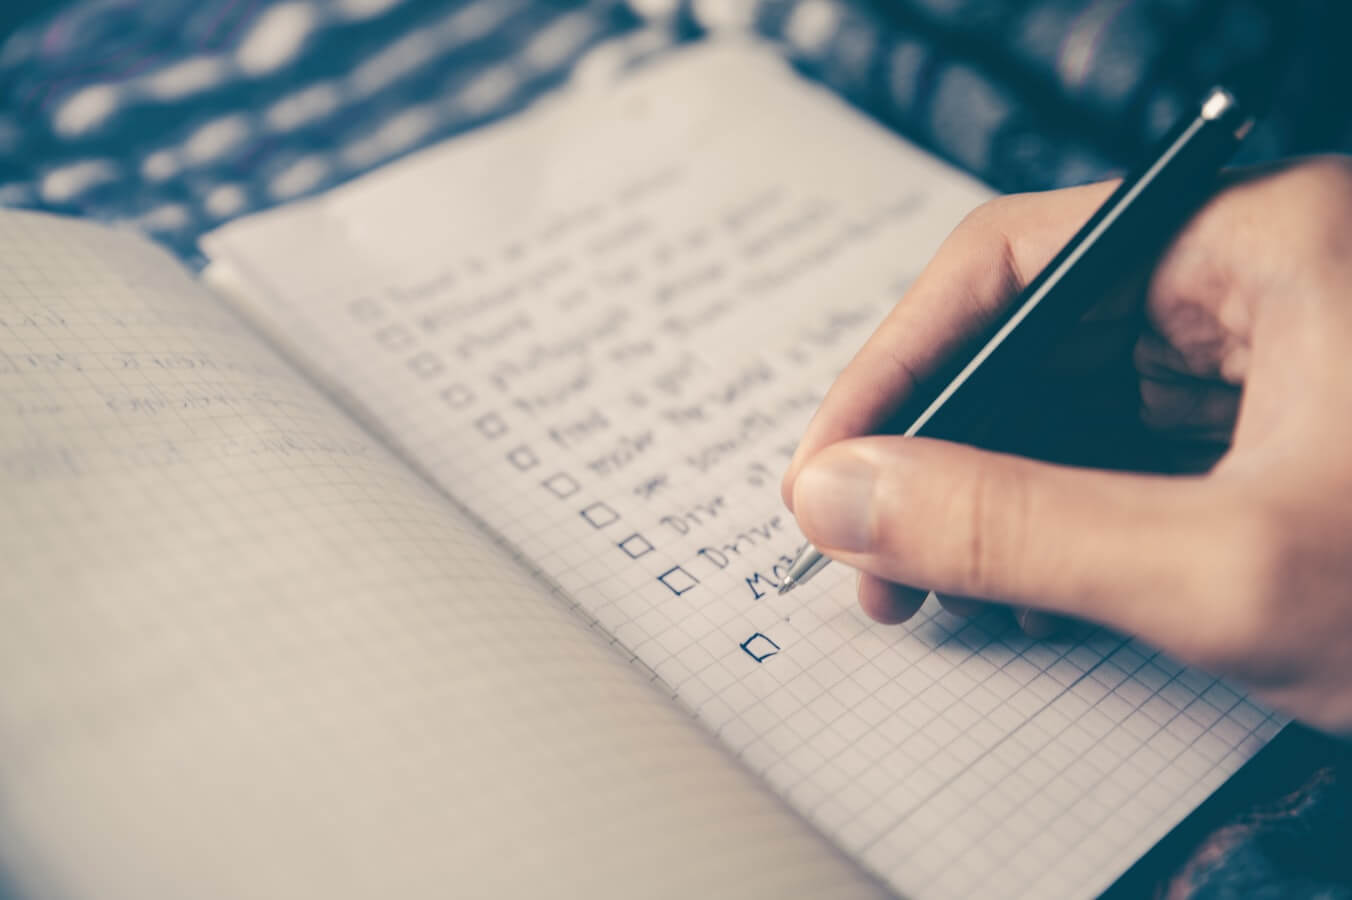 Appropriate Checklists for Year-End Tax Planning